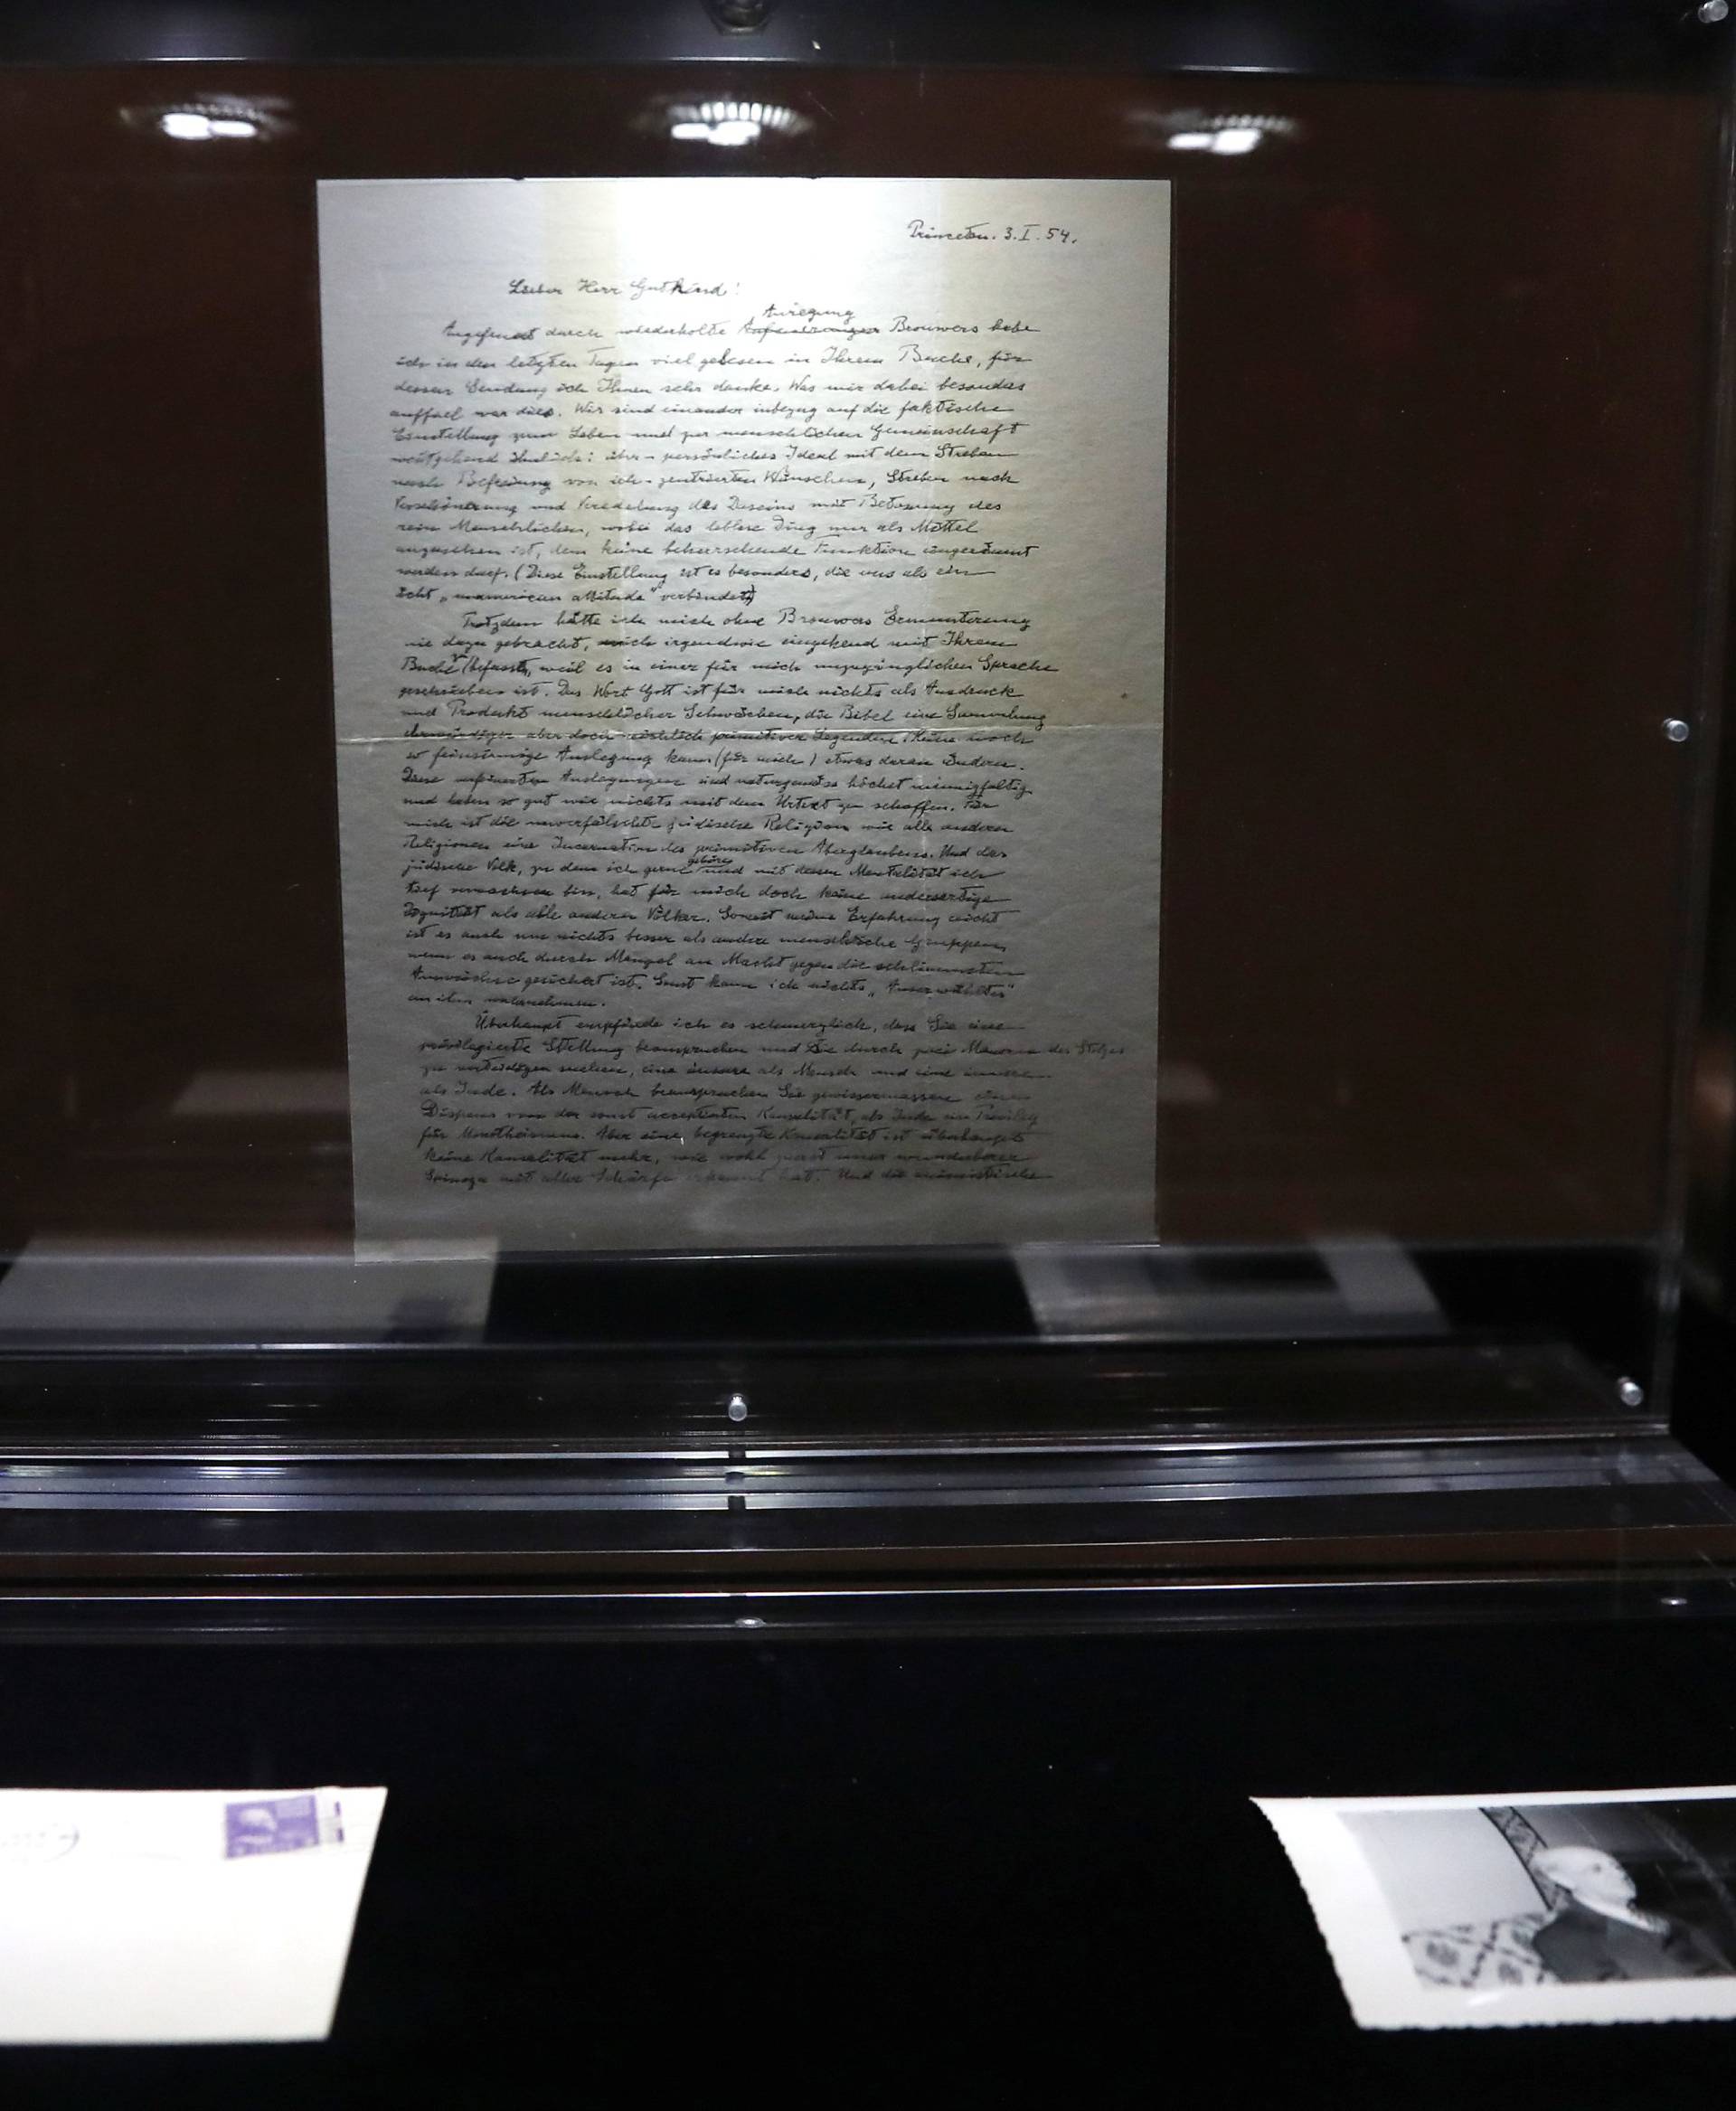 A letter known as "The God Letter"  written by Albert Einstein and addressed to philosopher Eric Gutkind from 1954 is seen on display at Christie's auction house ahead of it's sale in New York